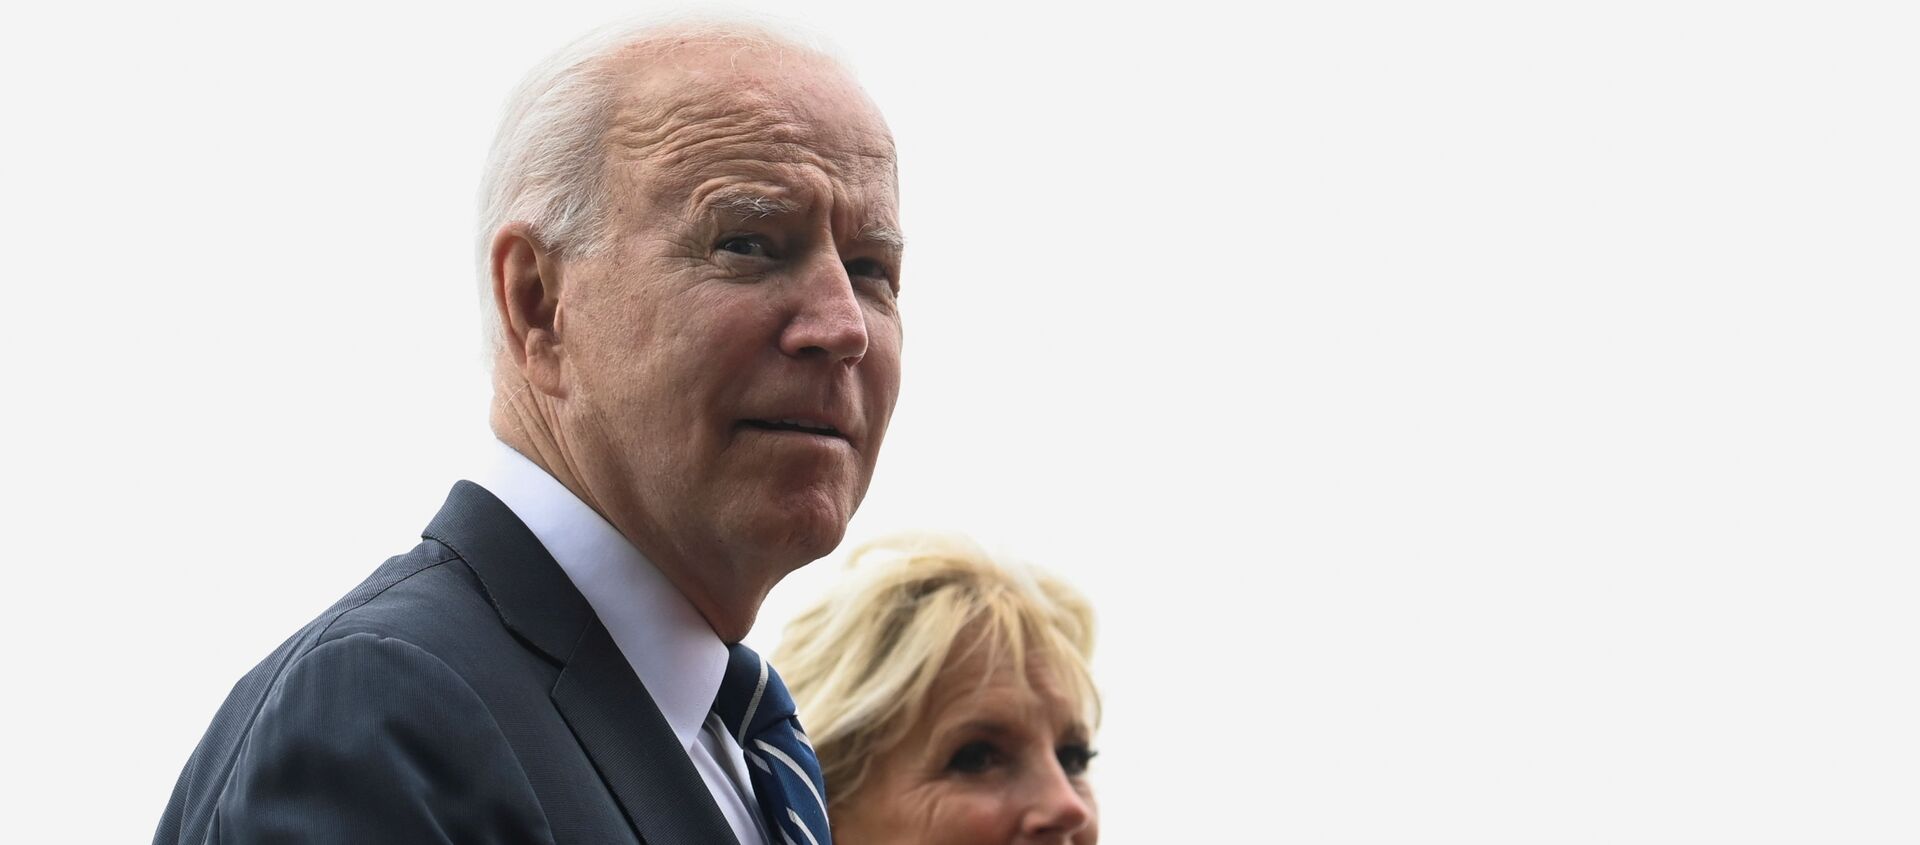 U.S. President Joe Biden and first lady Jill Biden walk outside Carbis Bay Hotel during their meeting with Britain's Prime Minister Boris Johnson and his wife Carrie Johnson (not pictured) , at Carbis Bay, Cornwall, Britain June 10, 2021. - Sputnik International, 1920, 12.06.2021